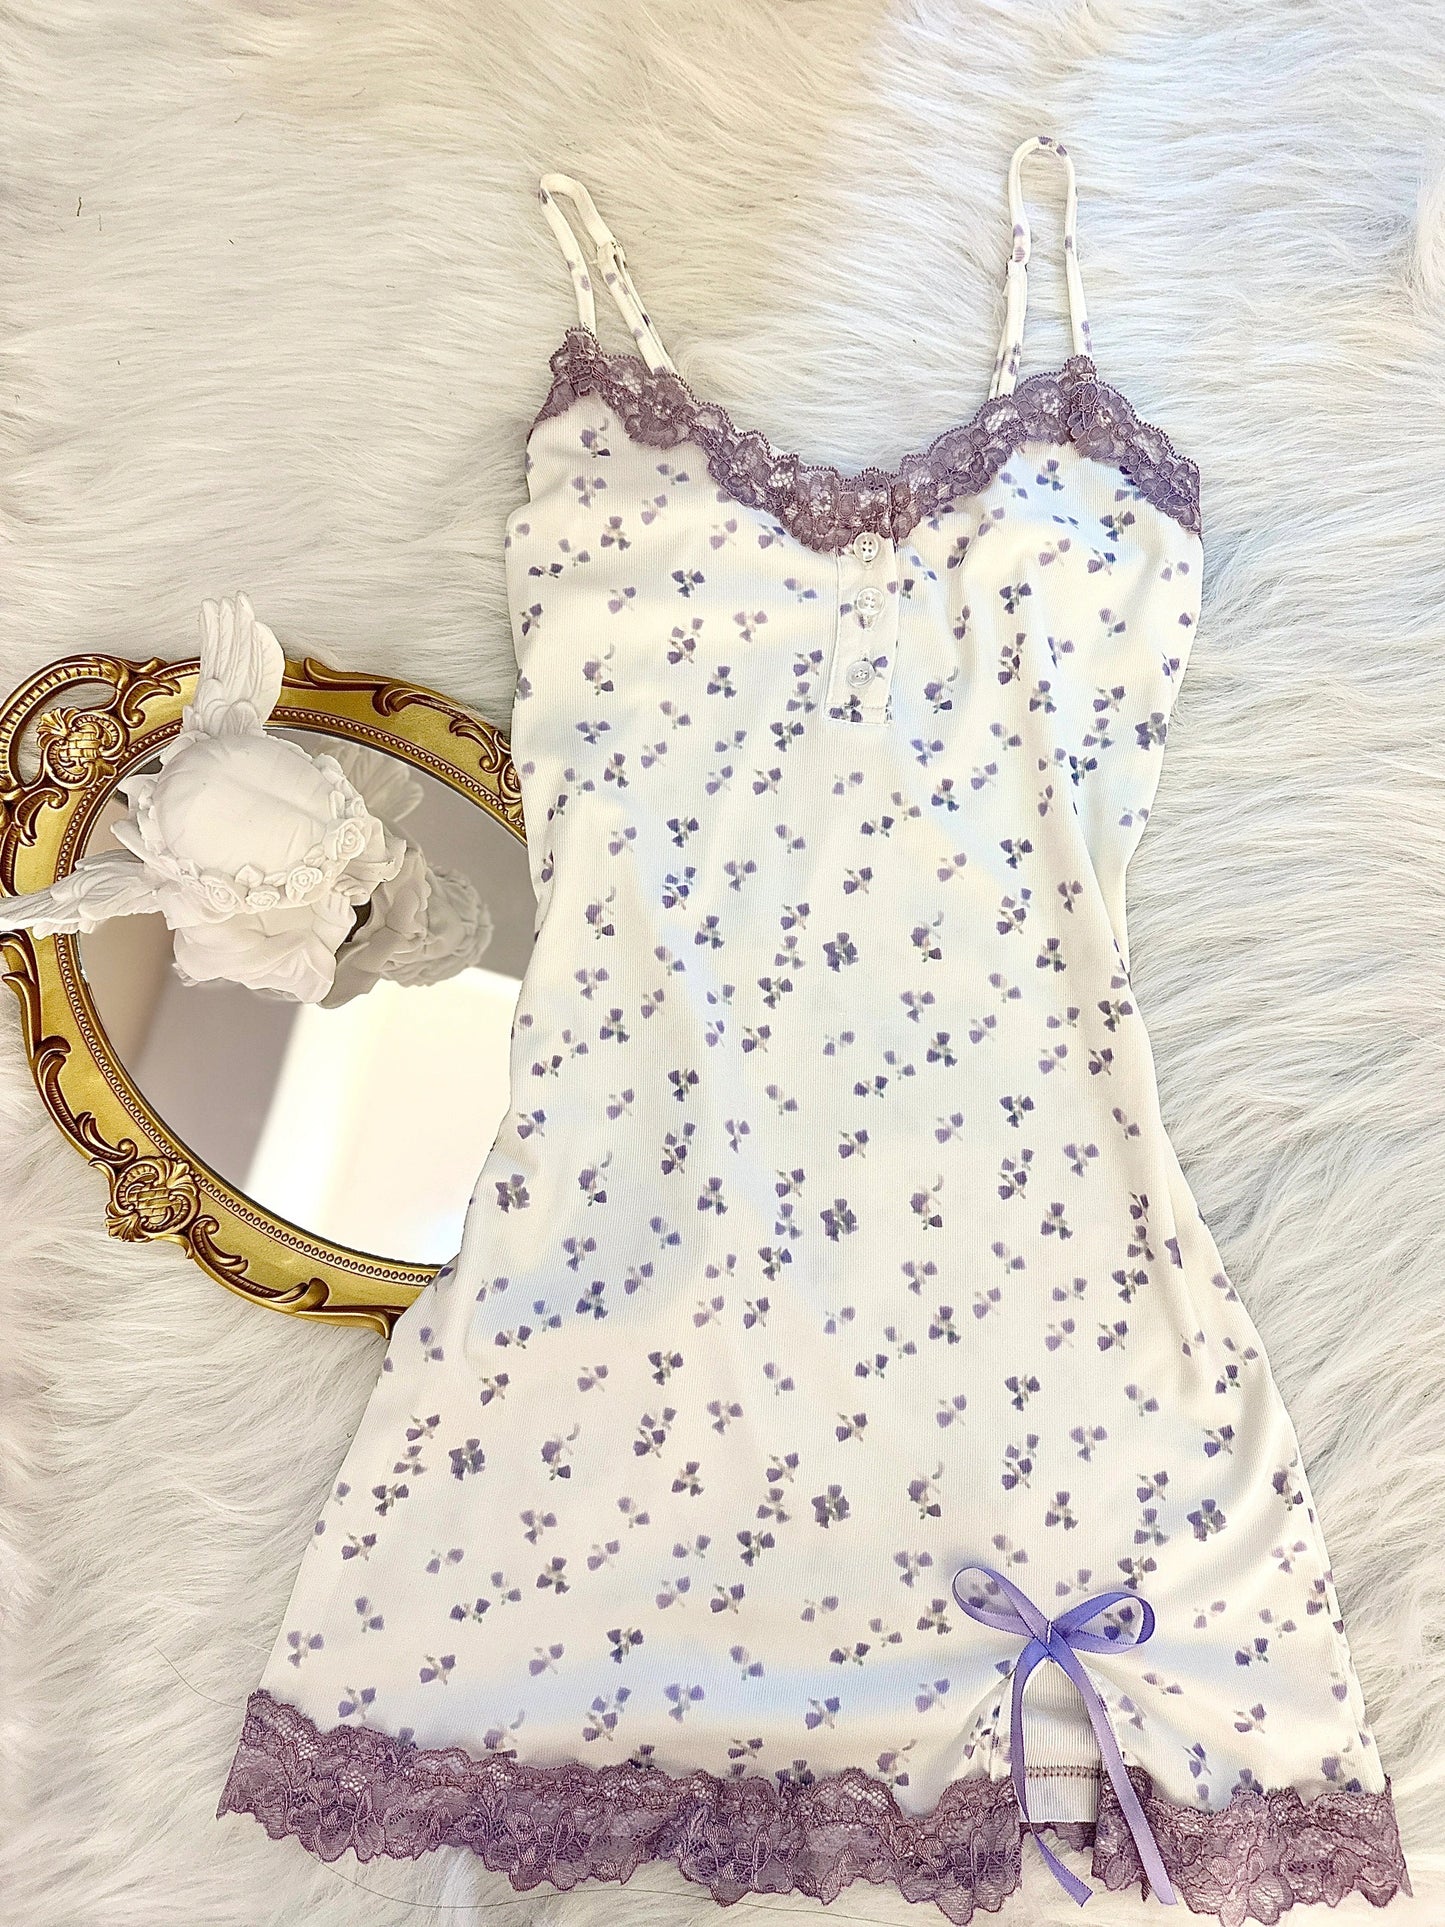 Floral Lace Trimmed Purple Camisole Nightgown